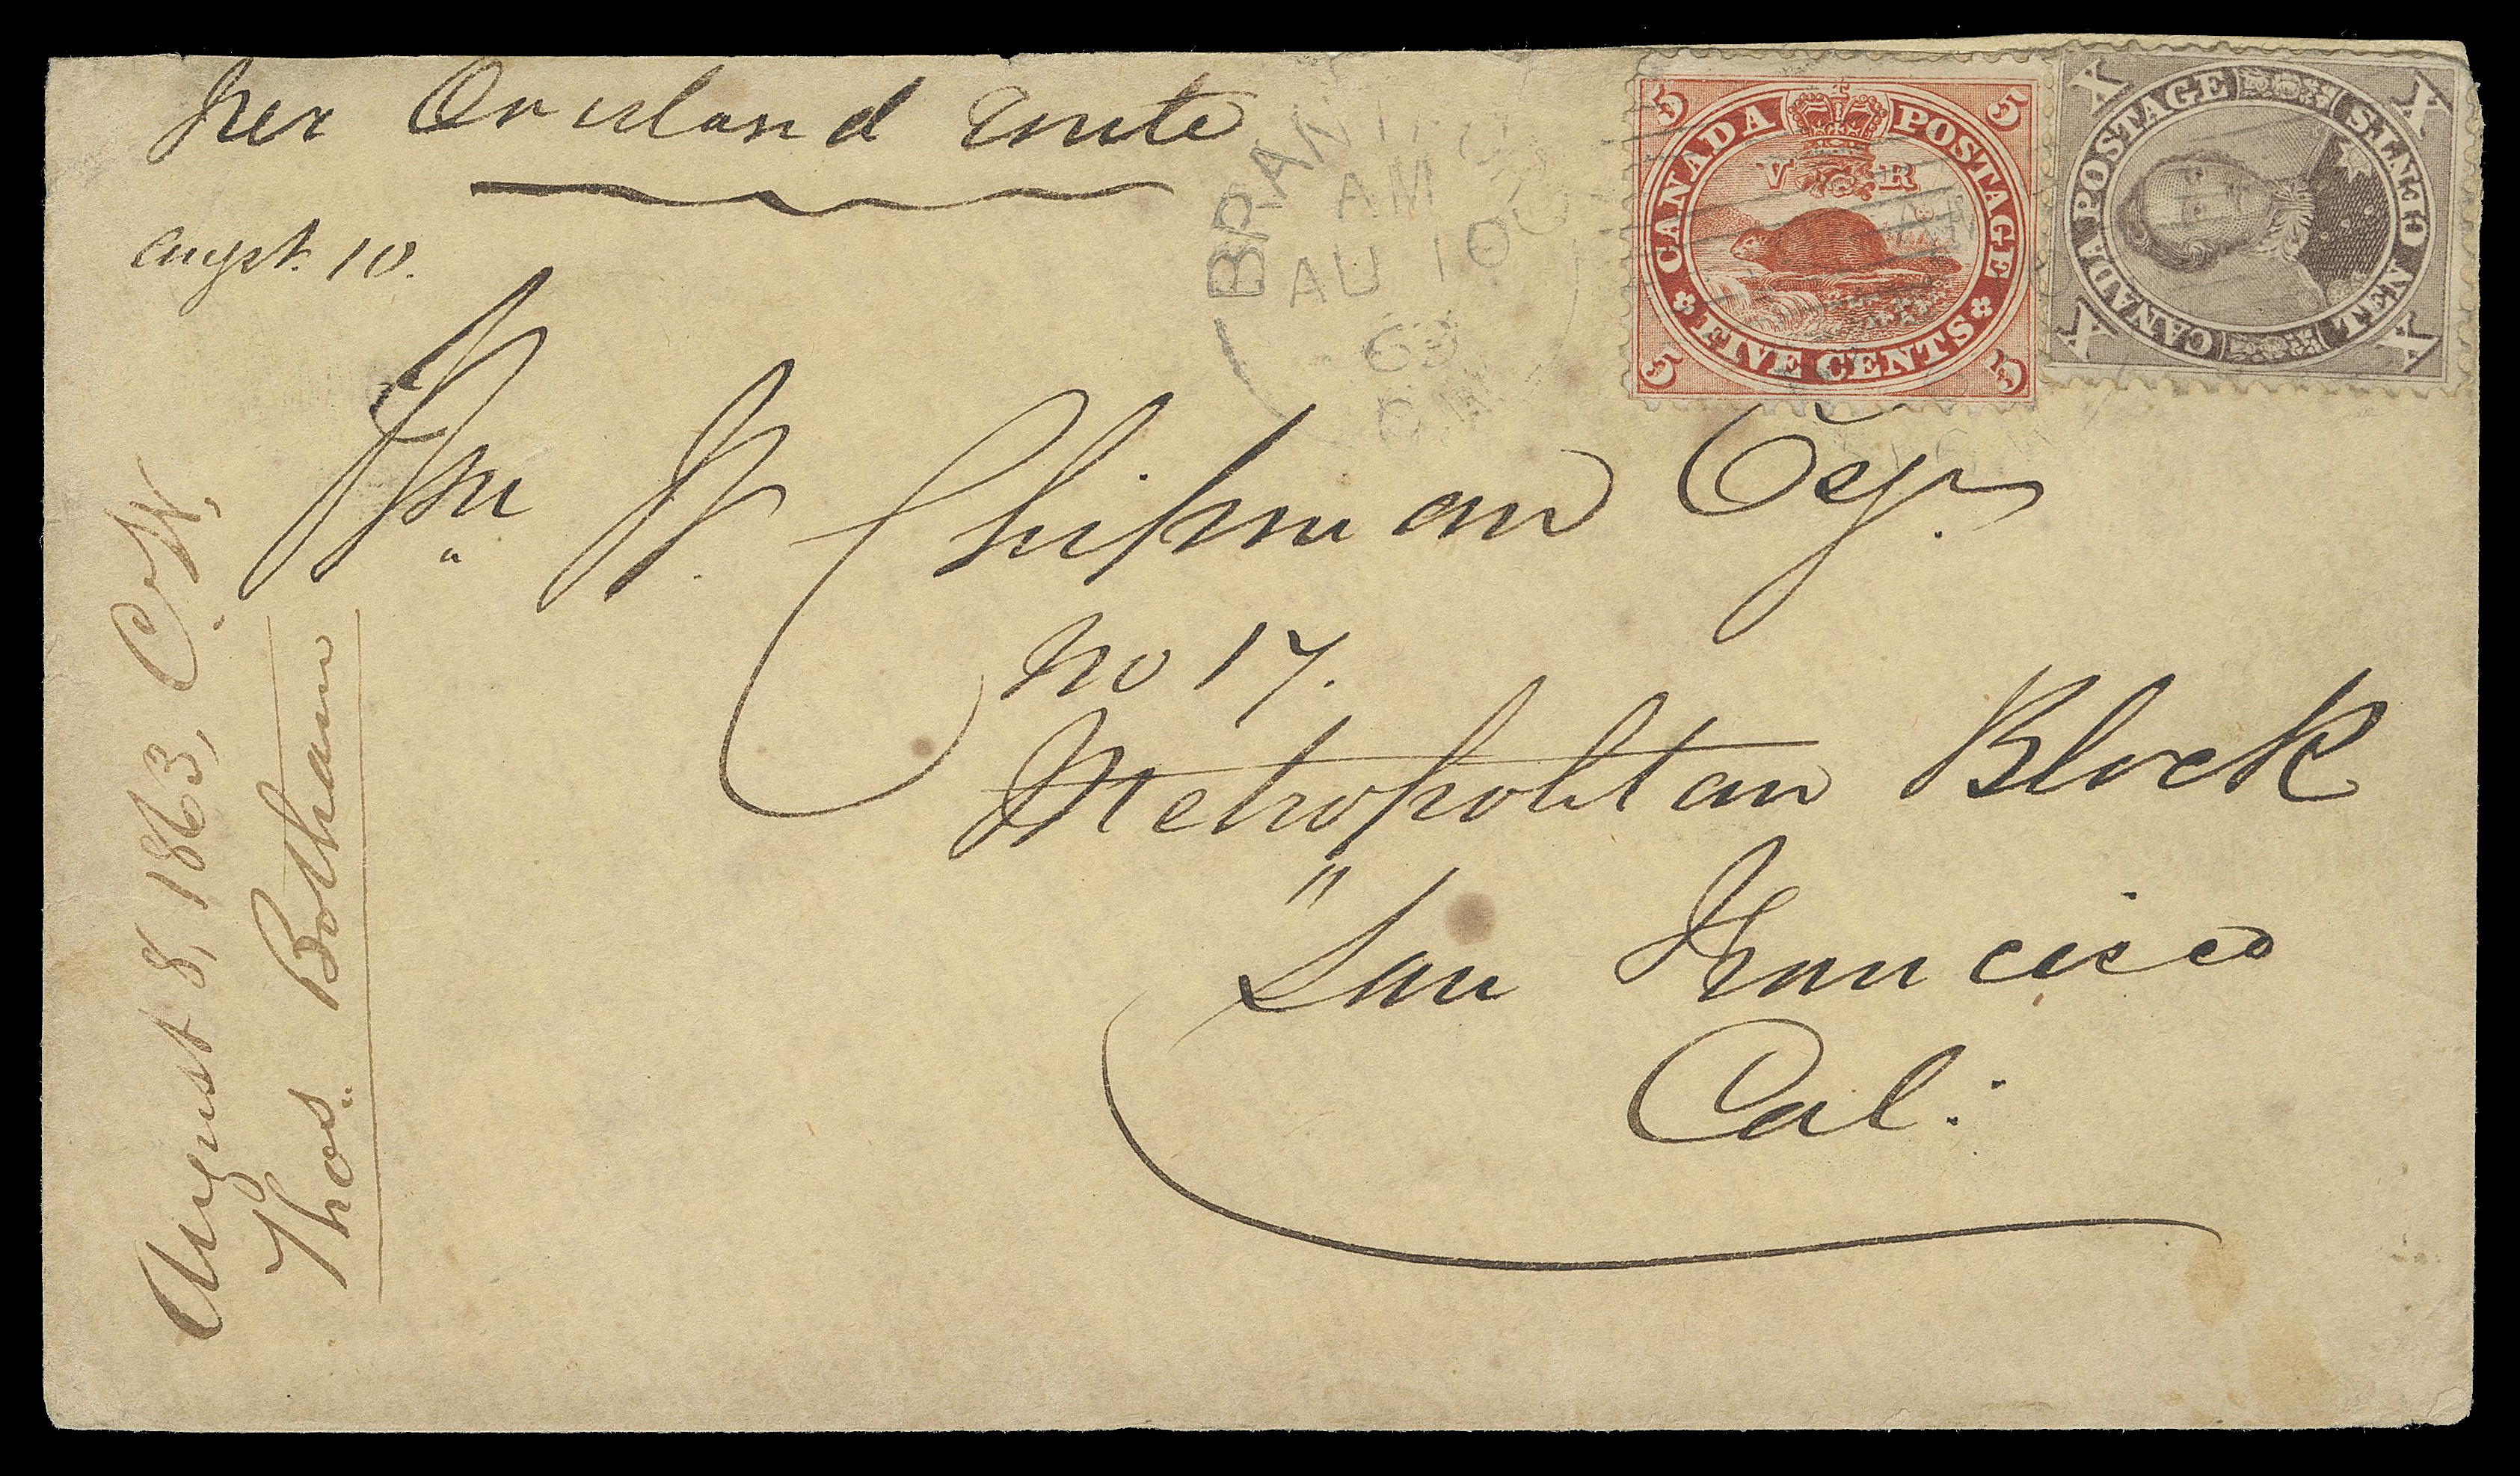 SIX PENCE AND TEN CENTS  1863 (August 10) Yellow cover endorsed "Per Overland Route" from Brantford, C.W. to San Francisco, California, franked with single 5c vermilion and 10c dull red brown, perf 12x11¾, tied by Brantford duplex, trivial perf flaws due to placement near edge of envelope, missing backflap and slight ageing. A very scarce 15 cent rate to California in effect between July 1, 1859 and June 30, 1864, Fine (Unitrade 15, 17b)

Provenance: Charles deVolpi, Sissons Sale 239, October 1965; Lot 92
Charles Firby Gold Medal Collection, Canada Pence & Cents covers, Harmers of New York, October 4, 1982; Lot 82
Warren Wilkinson, H.R. Harmer, Inc., New York, December 1997; Lot 648

Literature: Illustrated in Arfken & Leggett "Canada